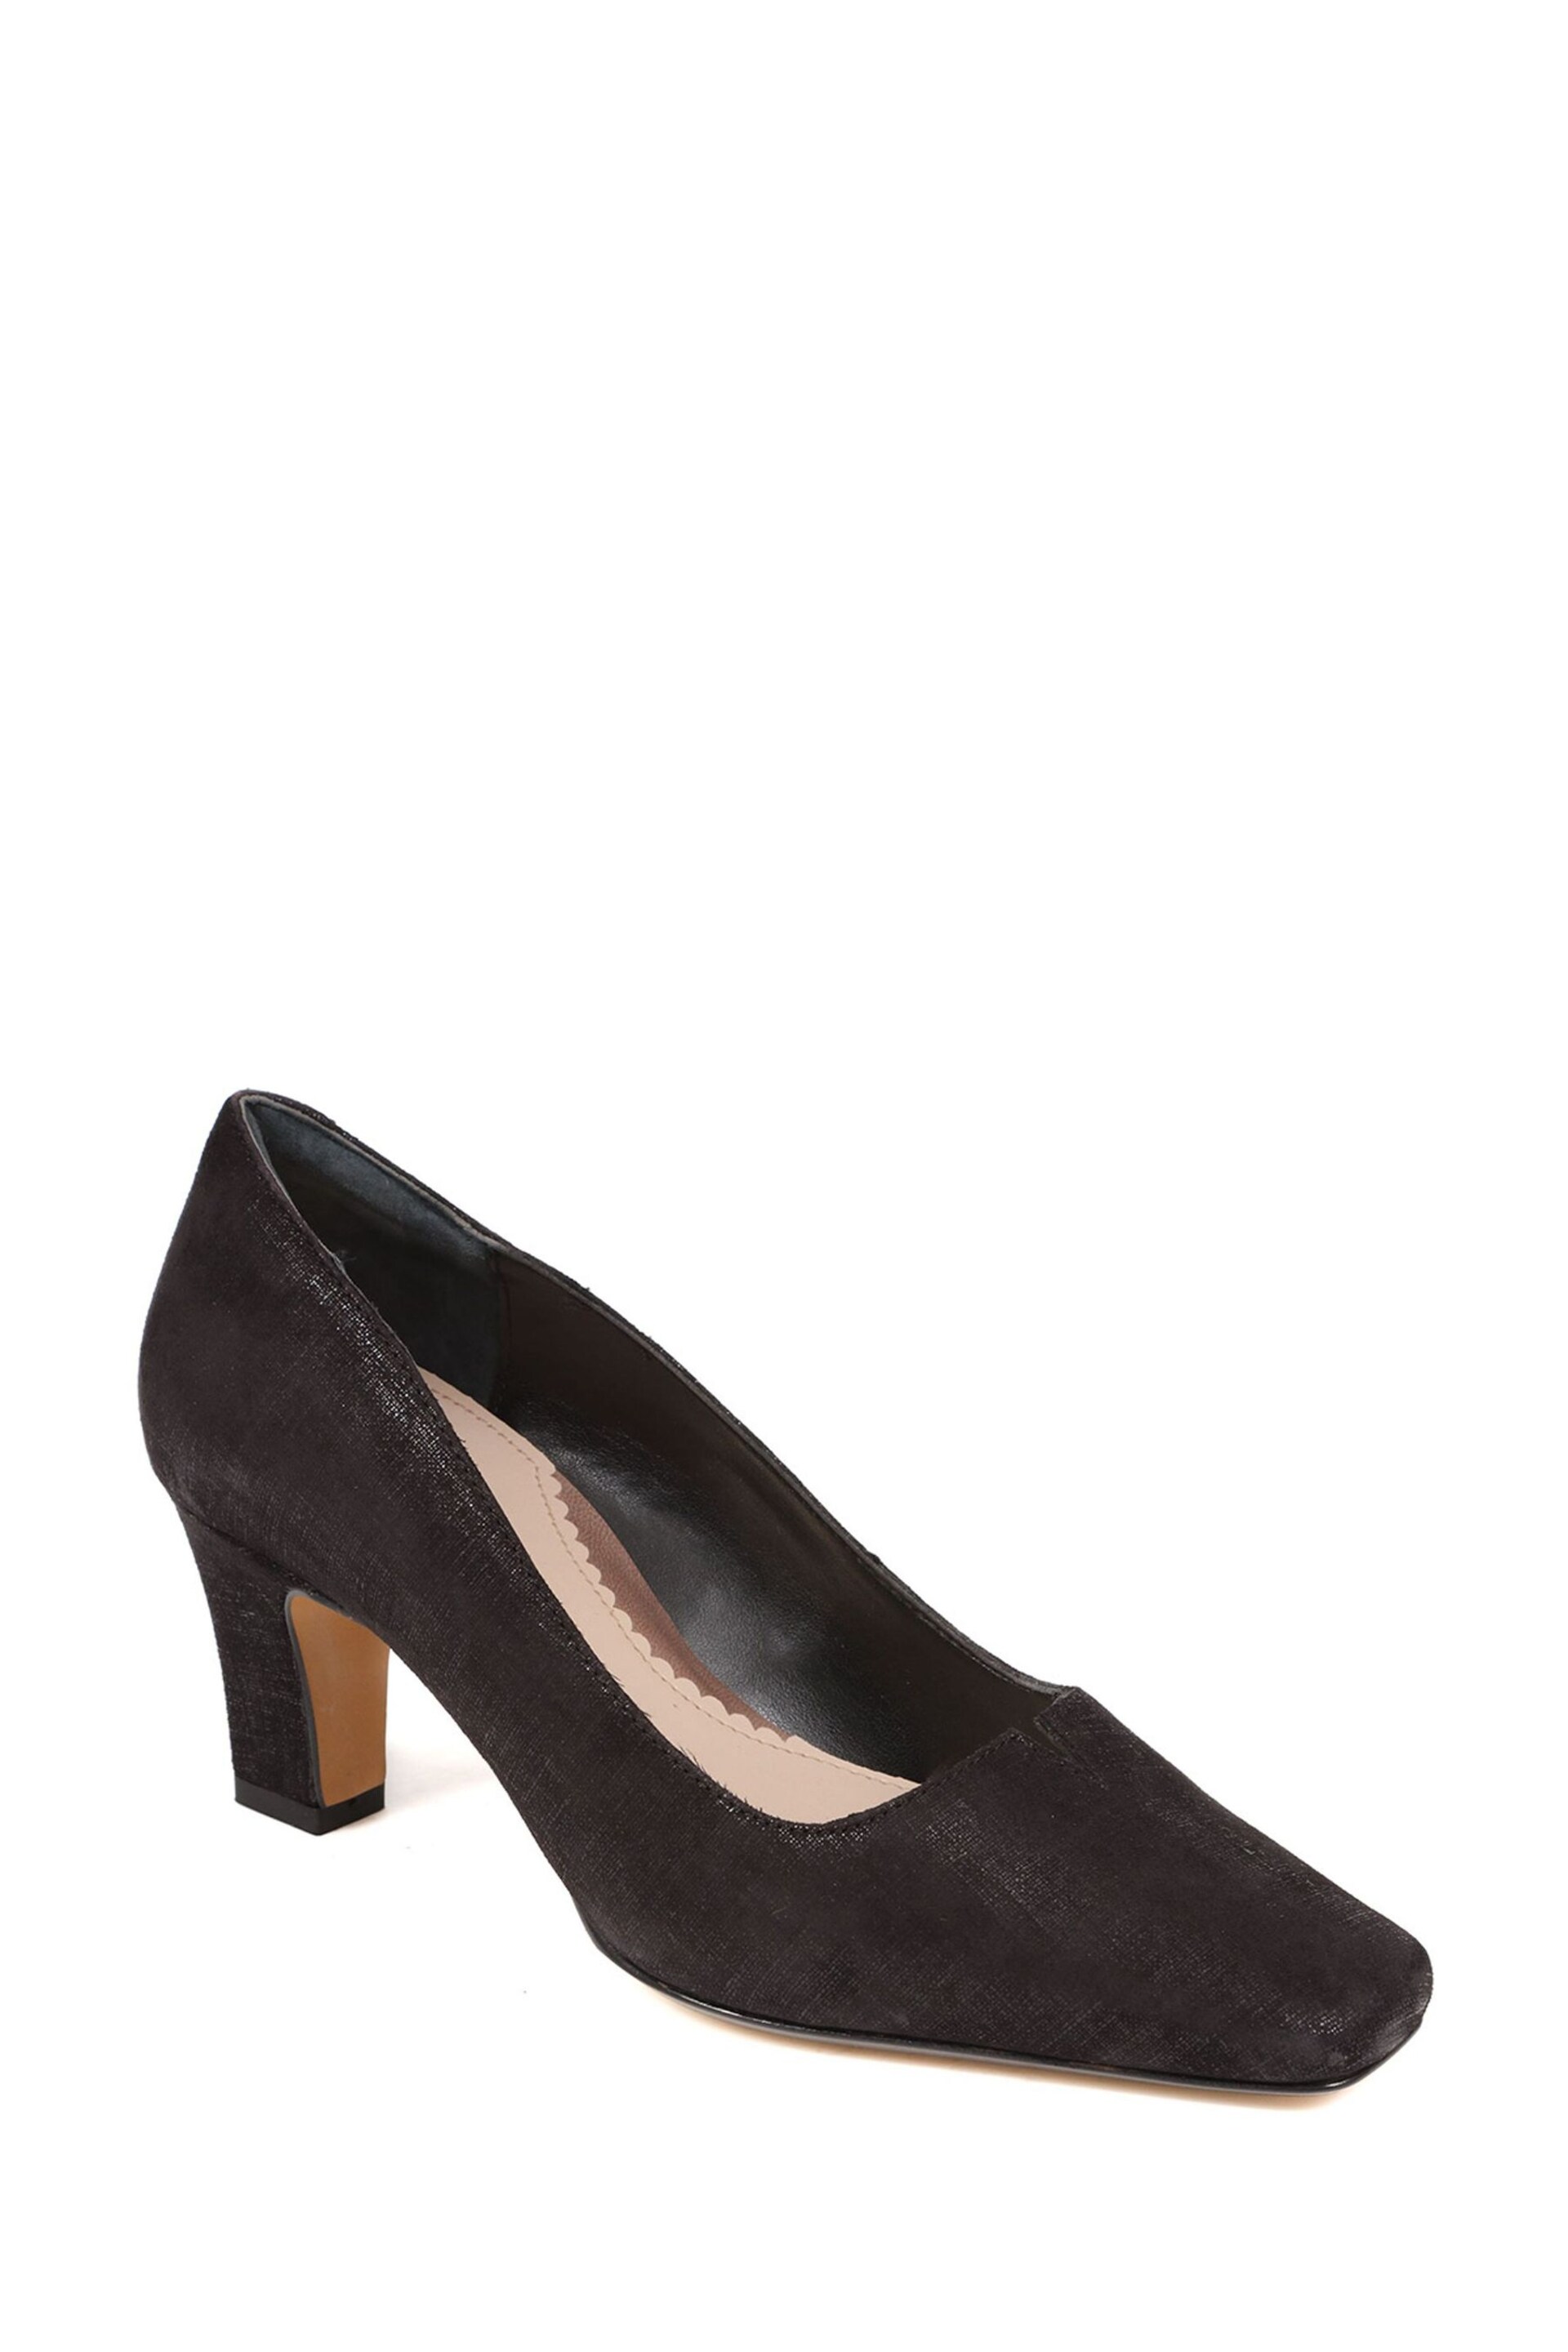 Pavers Van Dal Pointed Toe Leather Black Court Shoes - Image 2 of 5